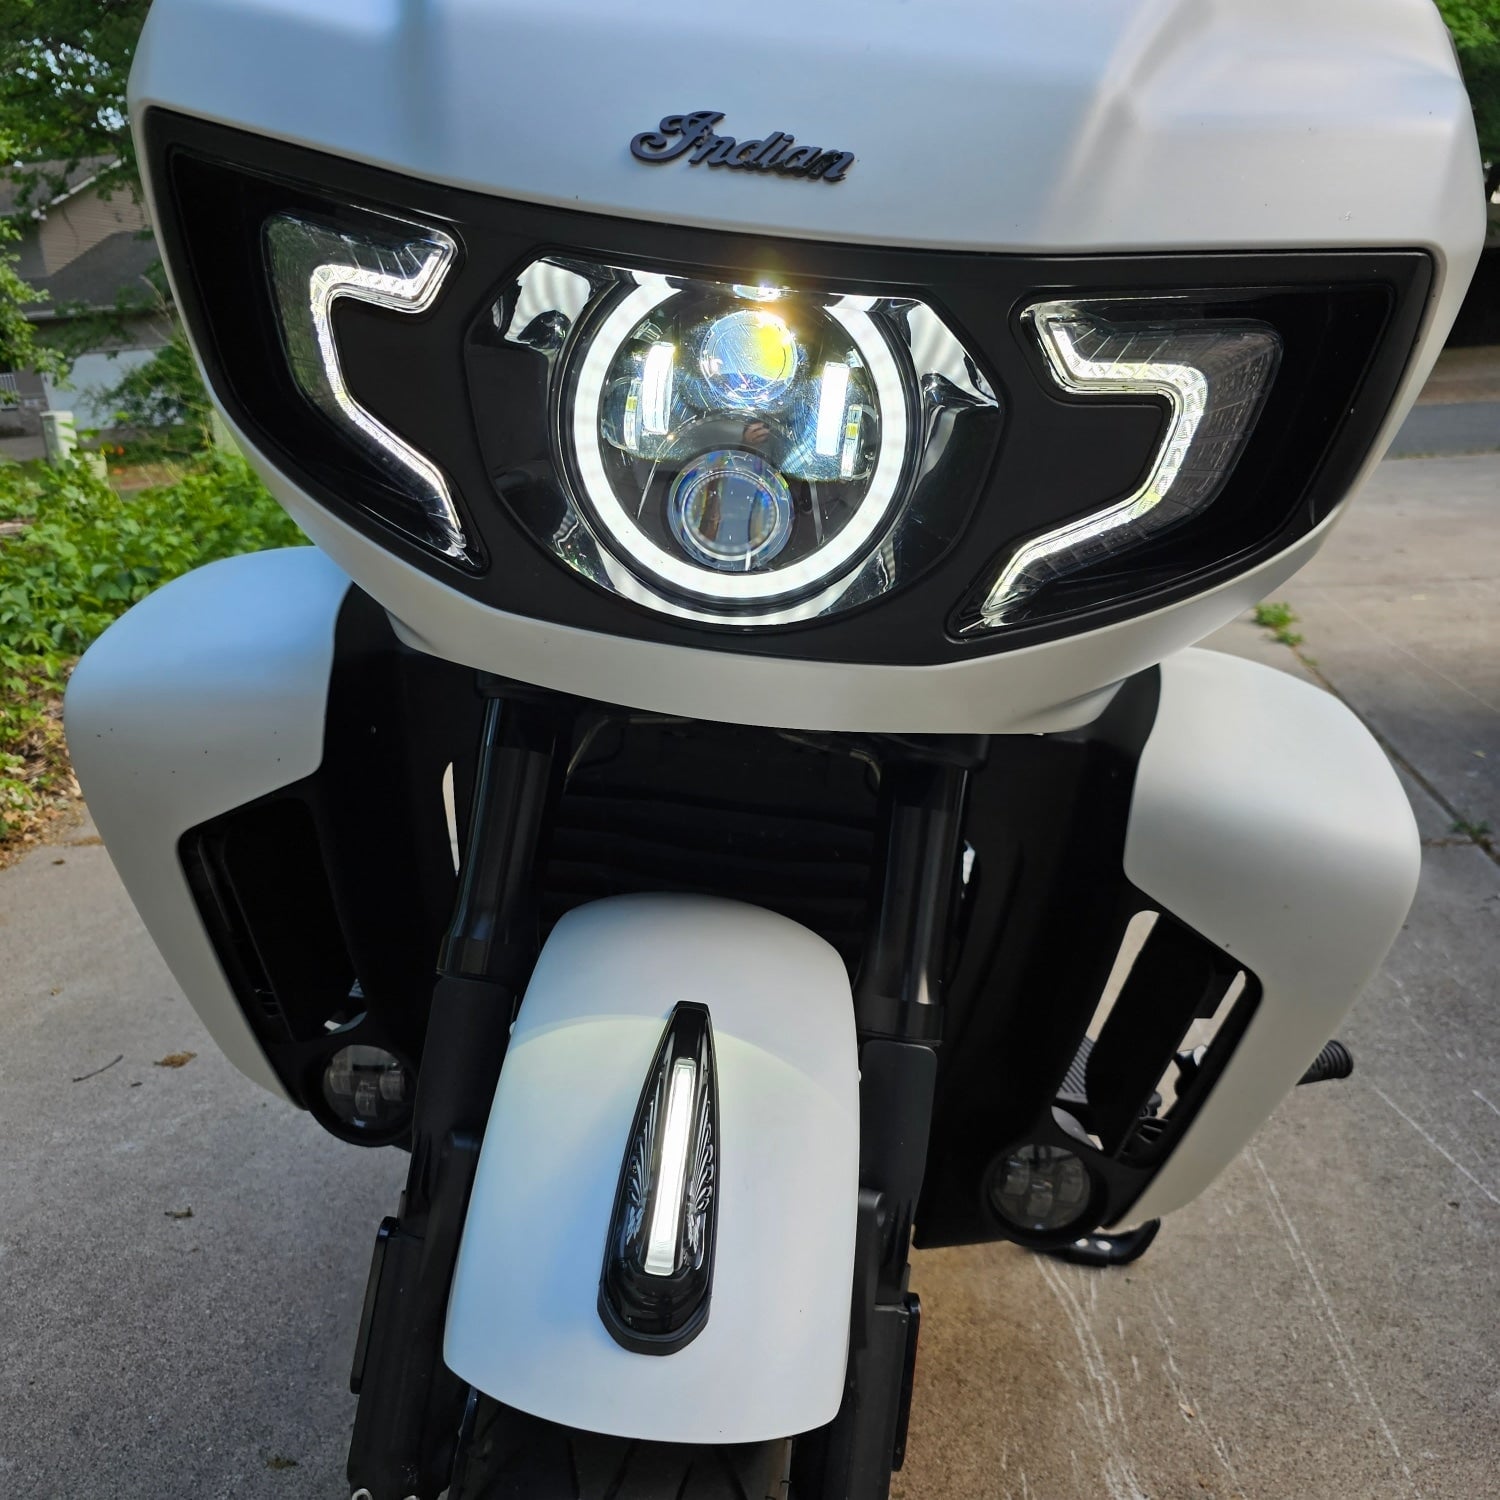 The Eagle Lights Generation II Indian Challenger LED Headlight Kit with Halo Ring